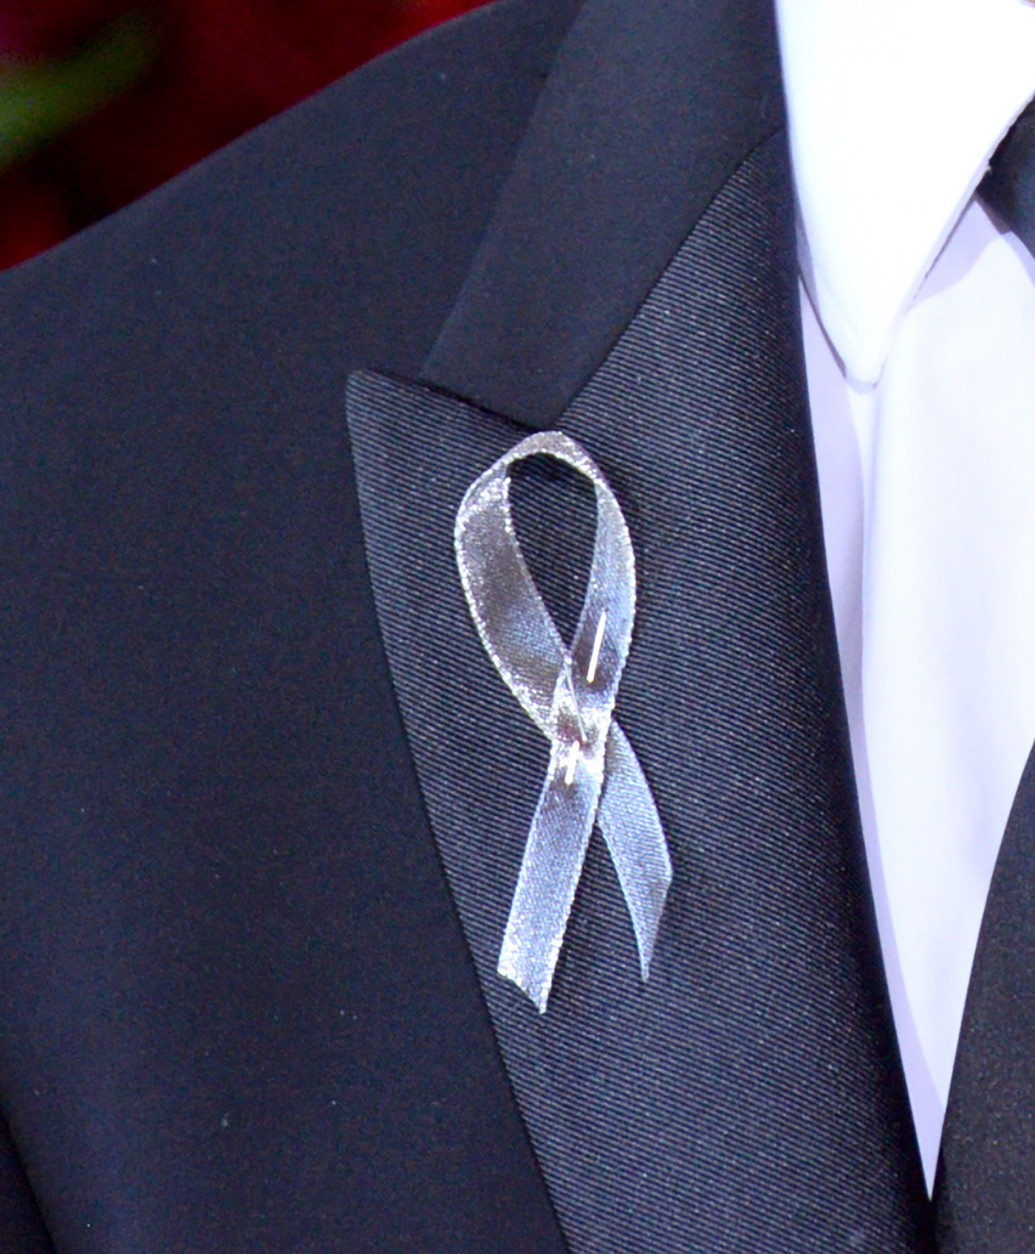 George C. Wolfe wears a silver ribbon on his lapel as he arrives at the Tony Awards at the Beacon Theatre on Sunday, June 12, 2016, in New York. (Photo by Charles Sykes/Invision/AP)